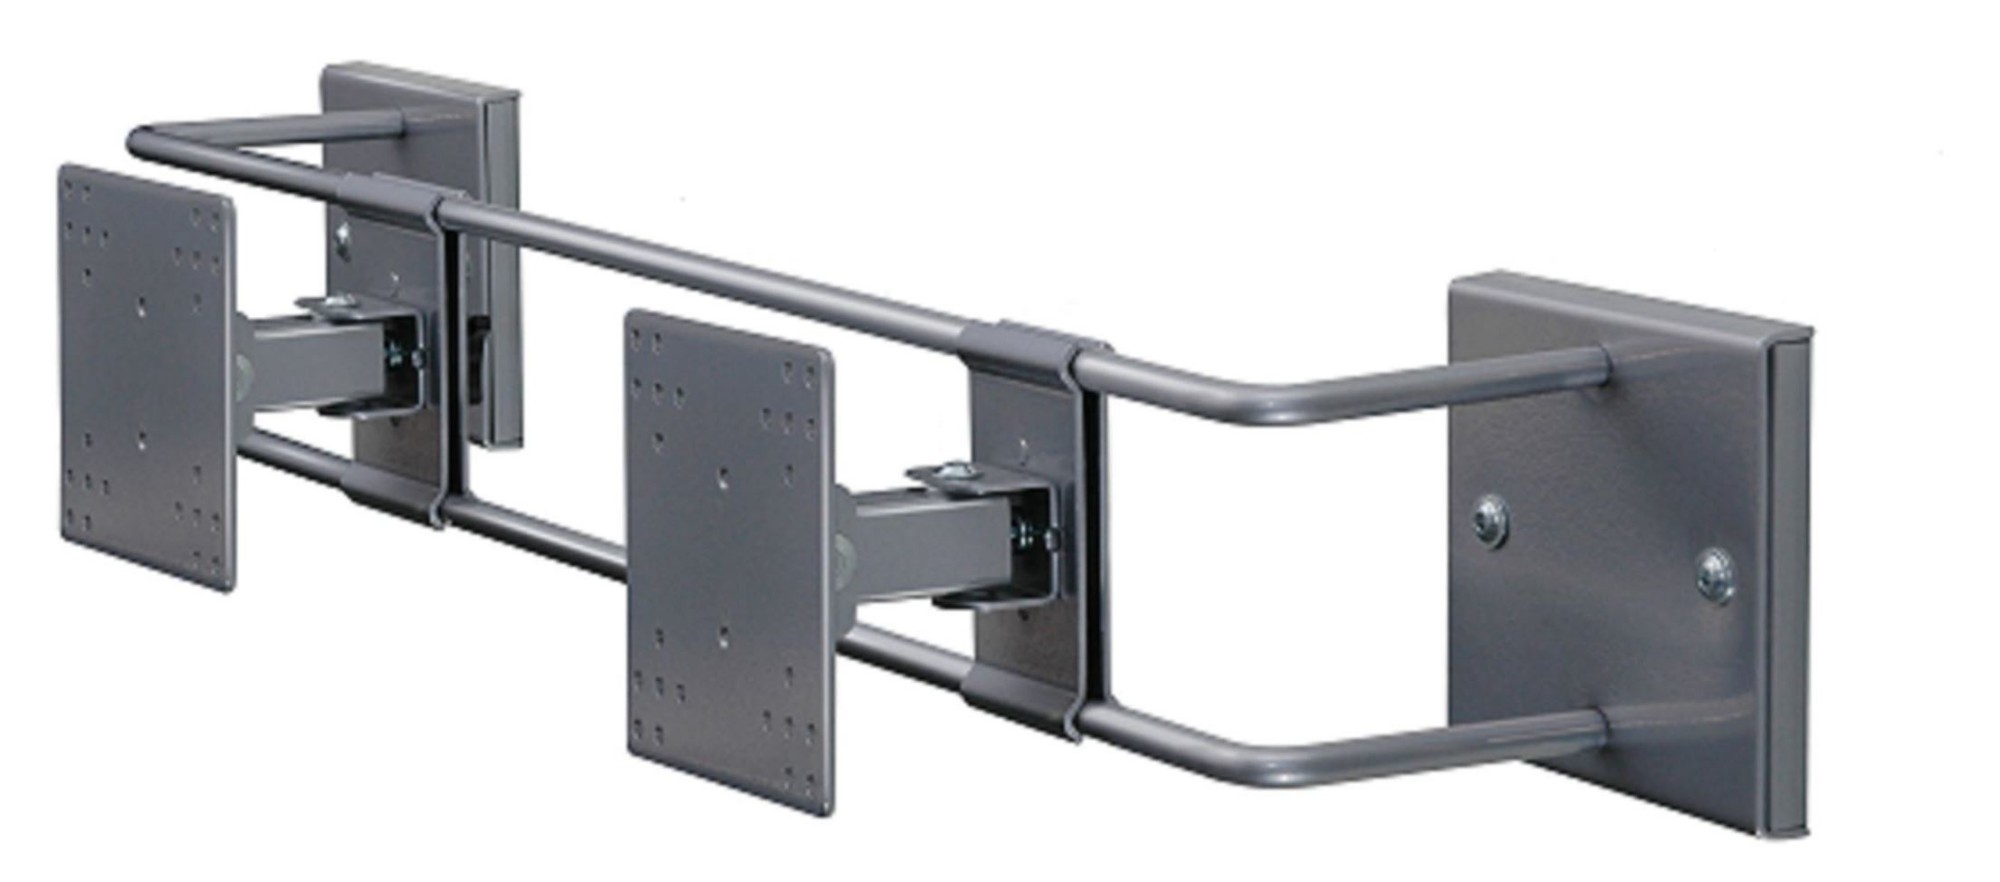 R-Go Tools R-Go Double Screen Wall Mount, up to 27", Max weight 10kg, adjustable, silver